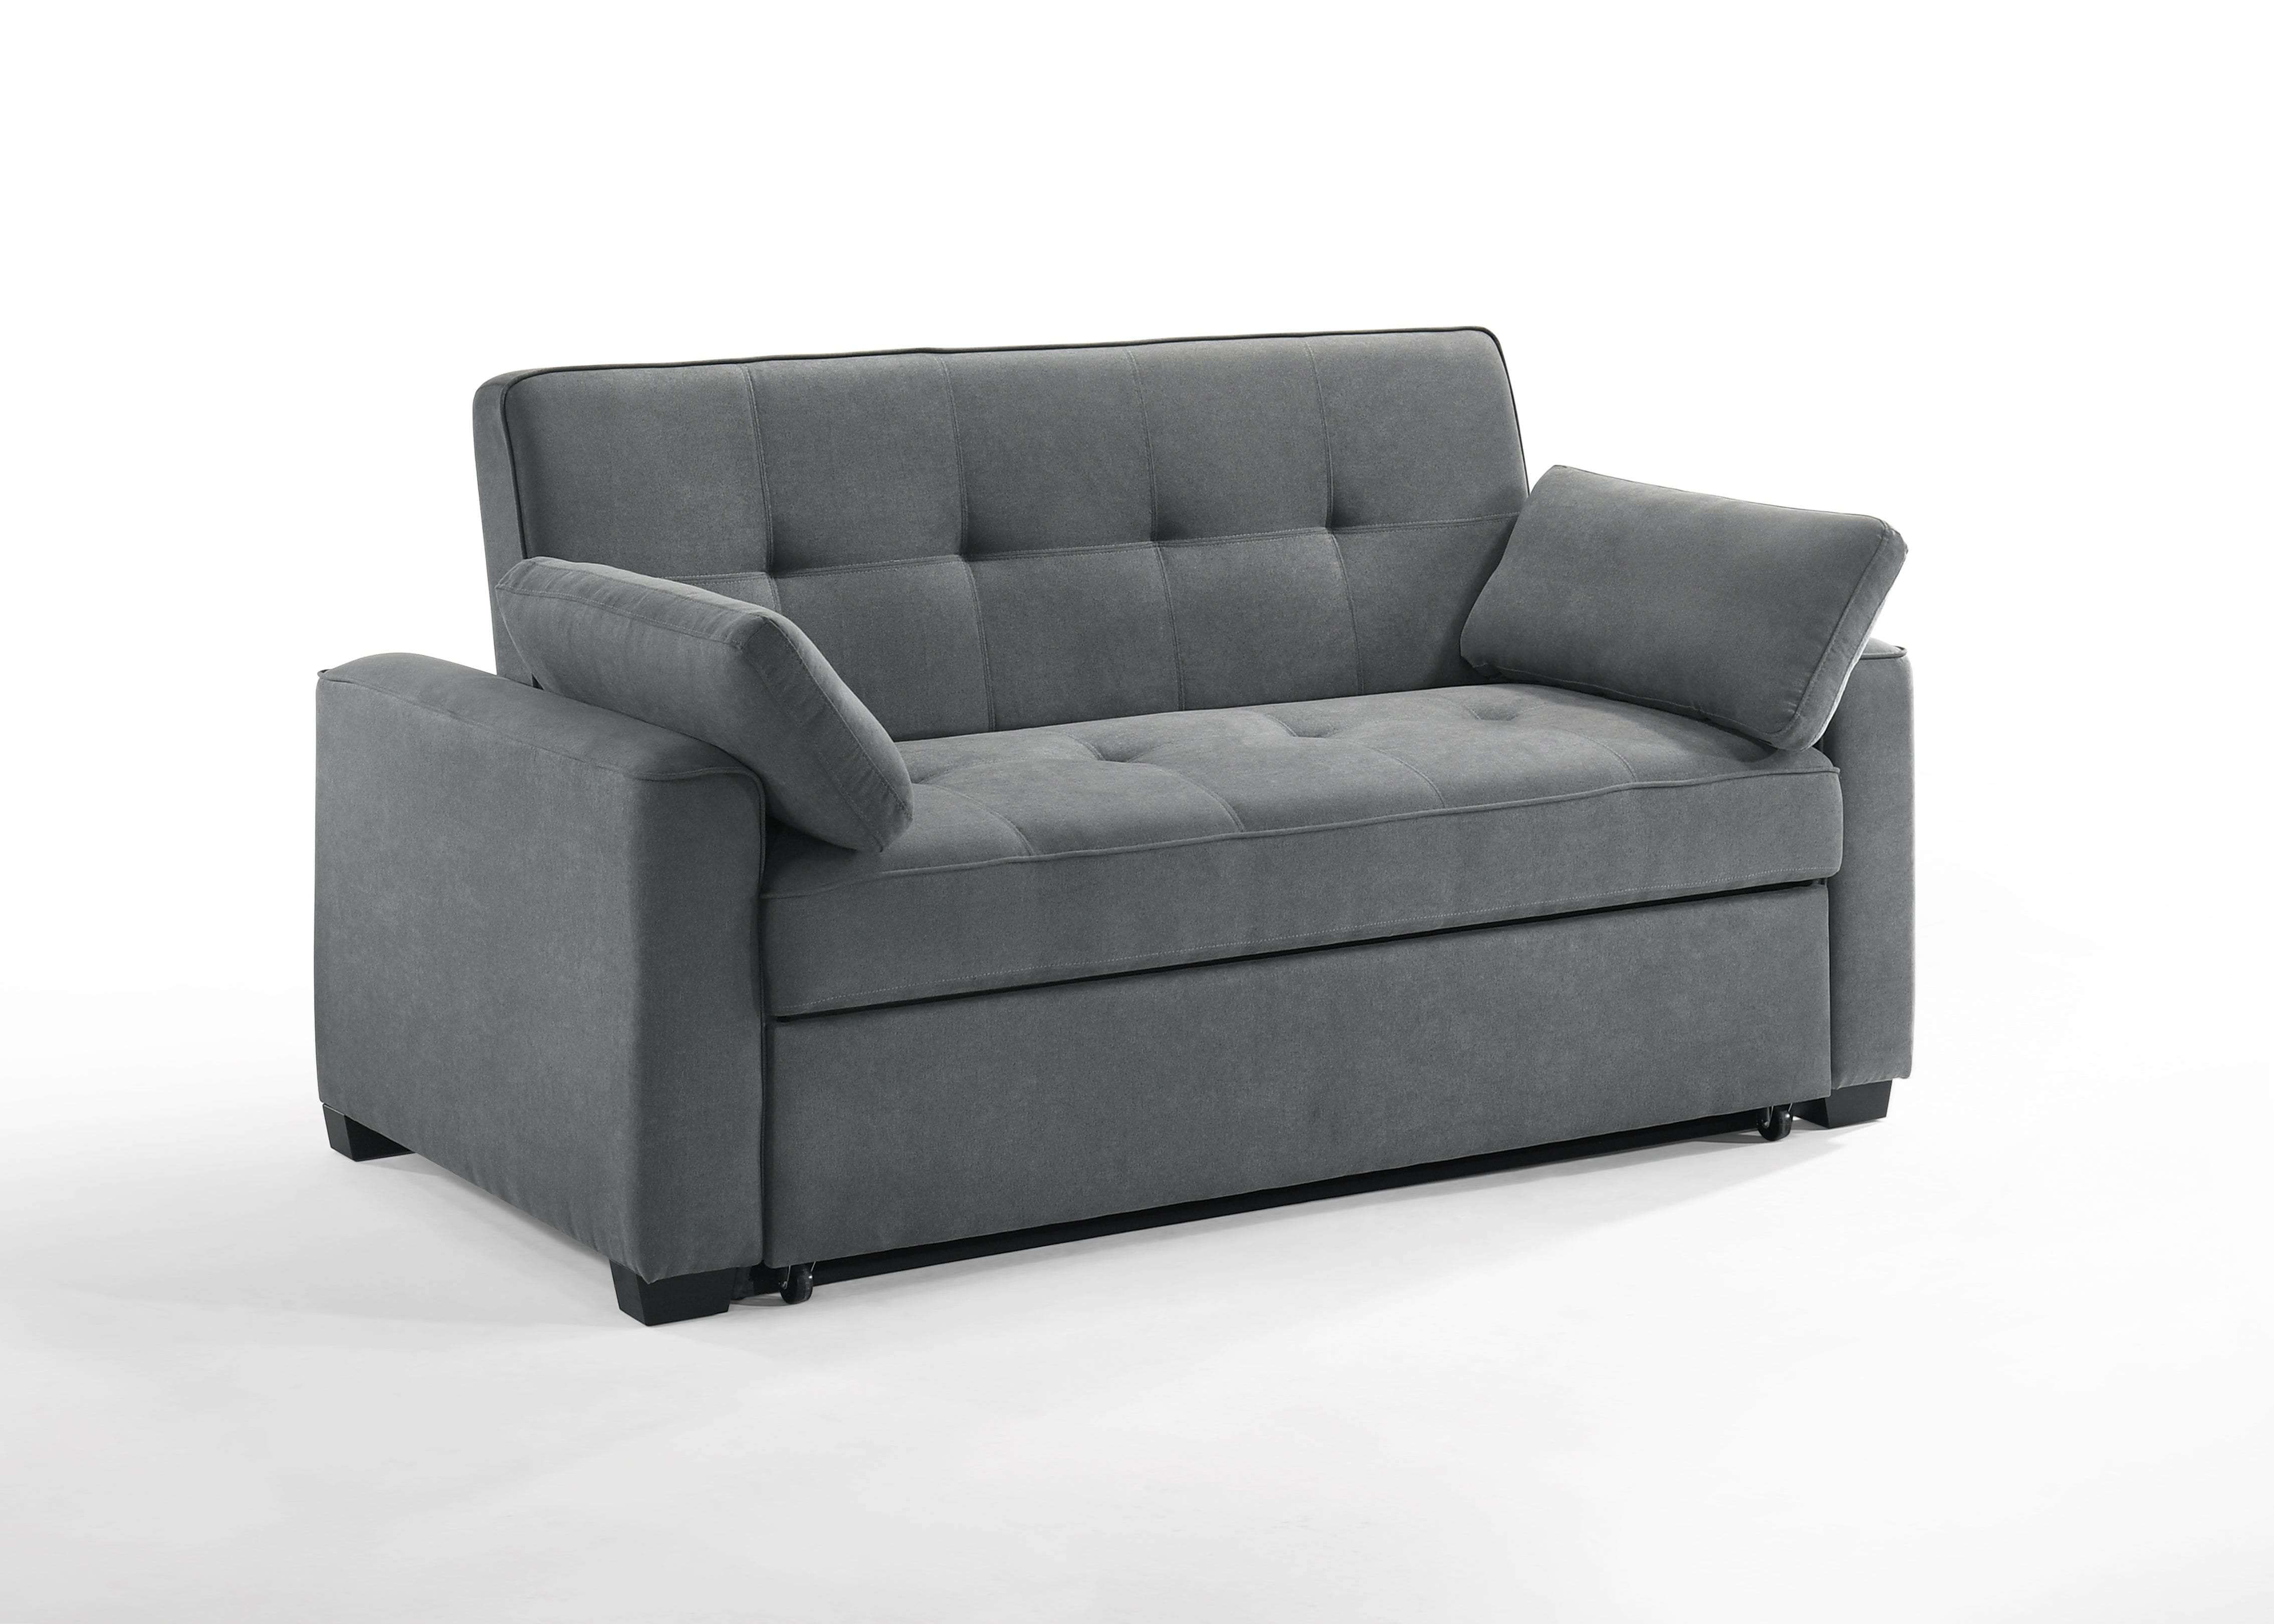 Night and Day Sofa Bed Manhattan Queen Size Sleeper Sofa Bed – Available in 3 Colours